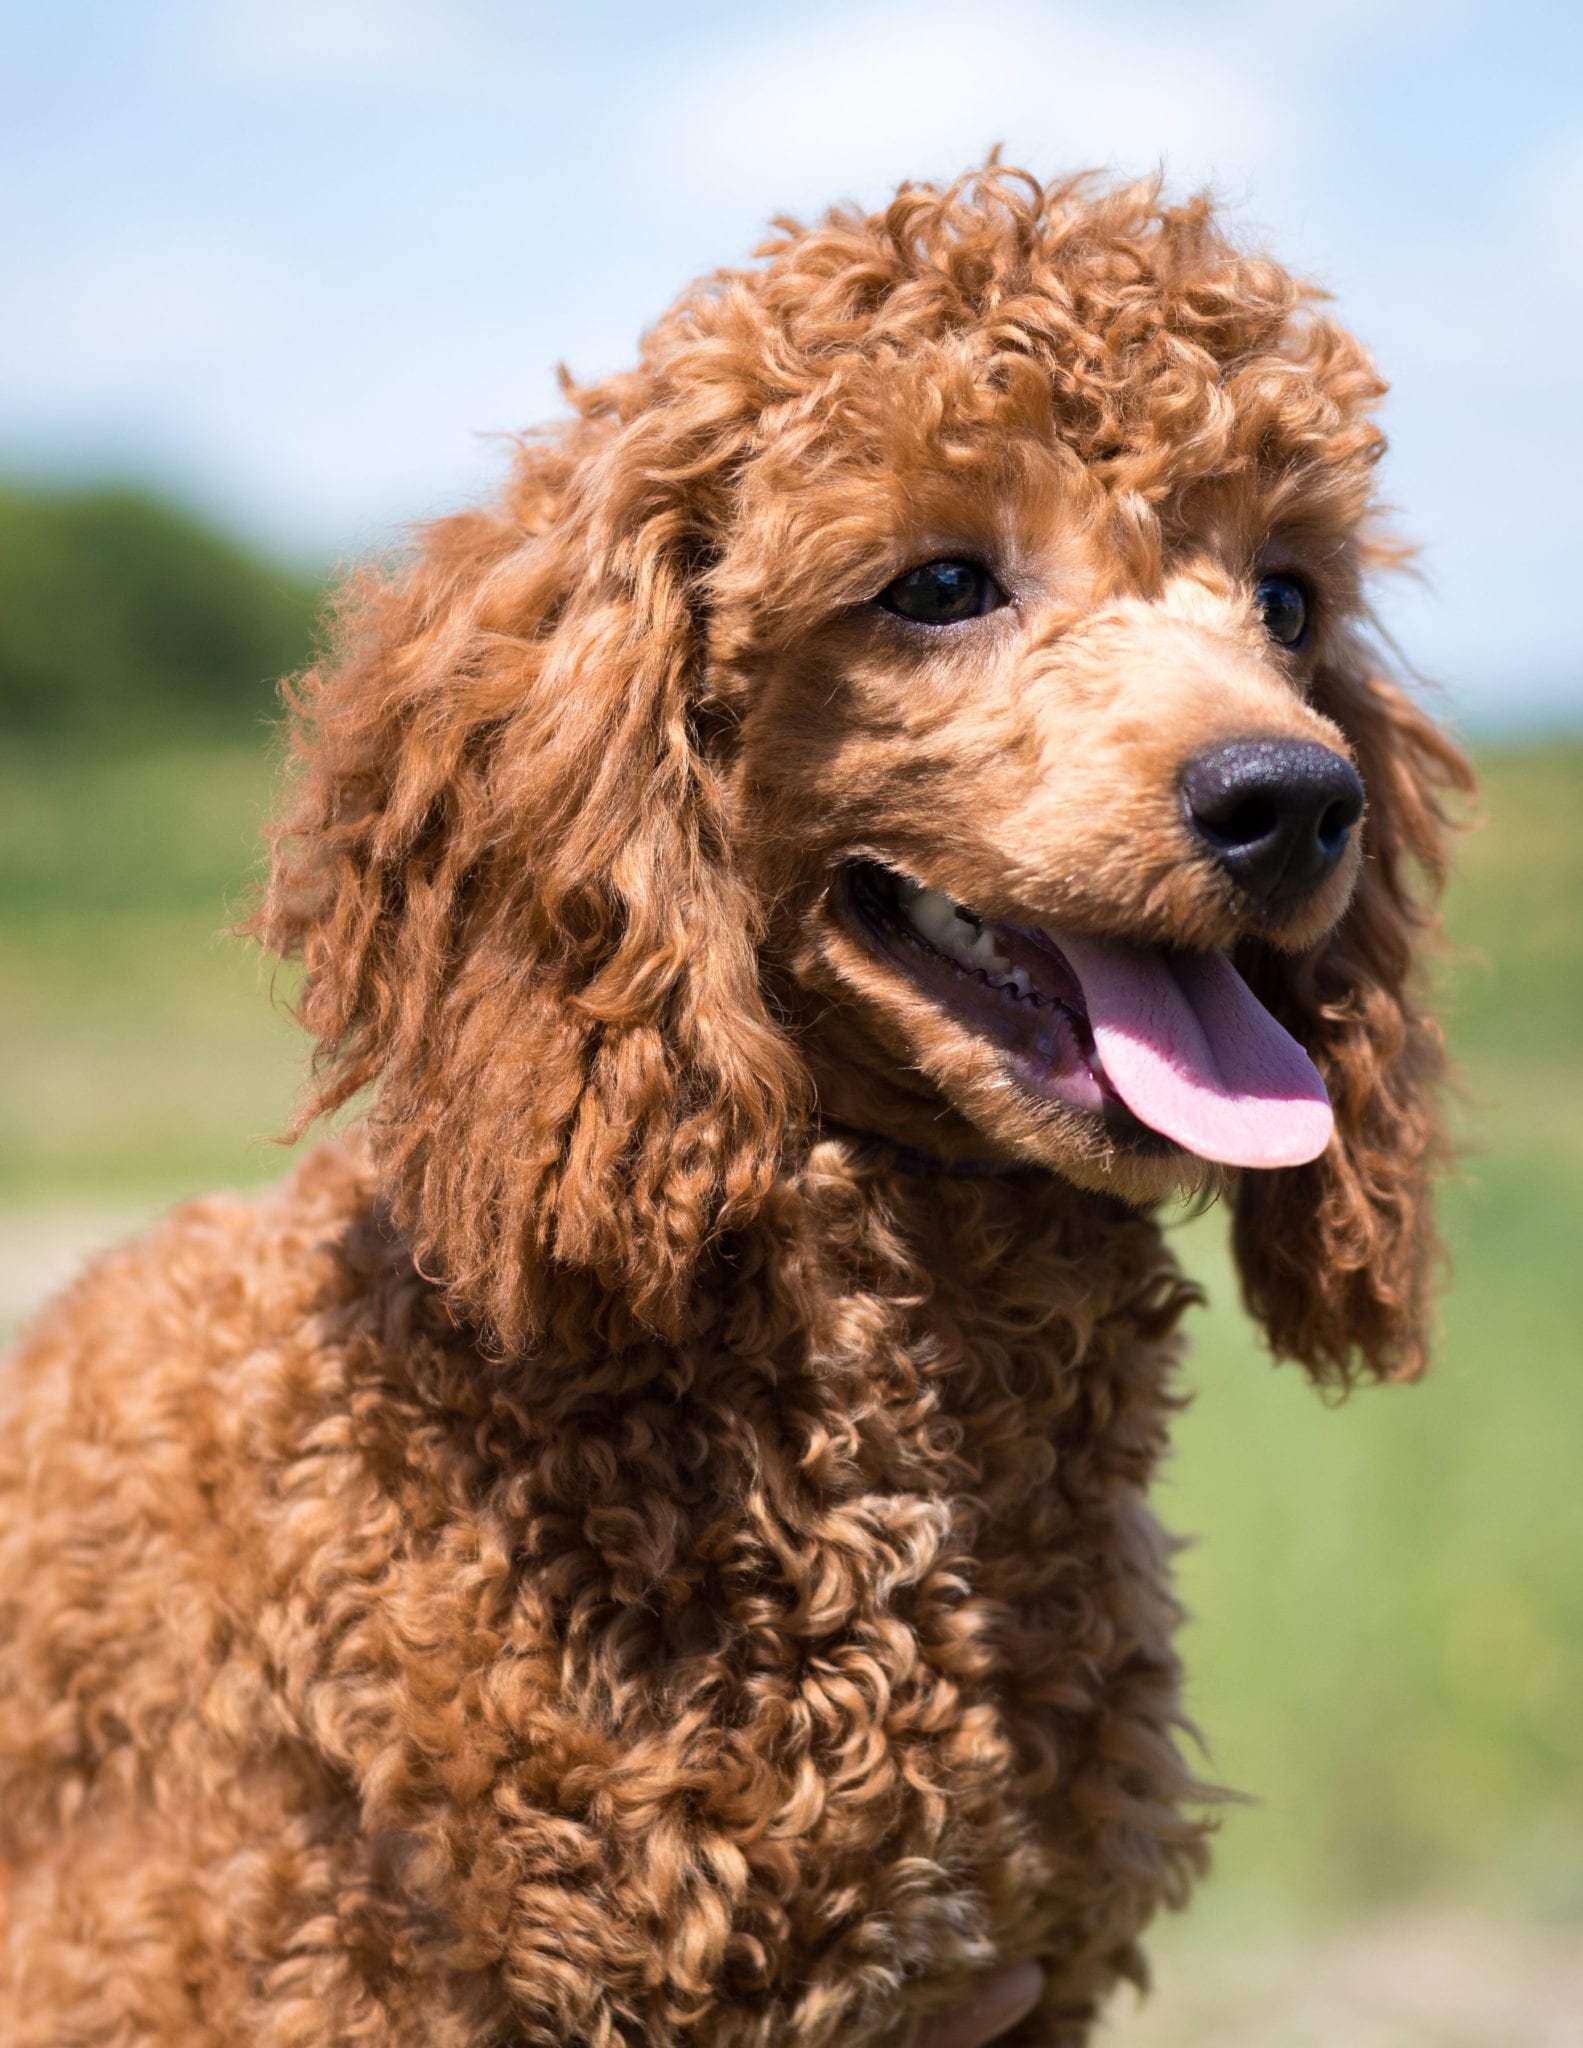 A litter of  Cavapoos raised in Iowa by Poodles 2 Doodles